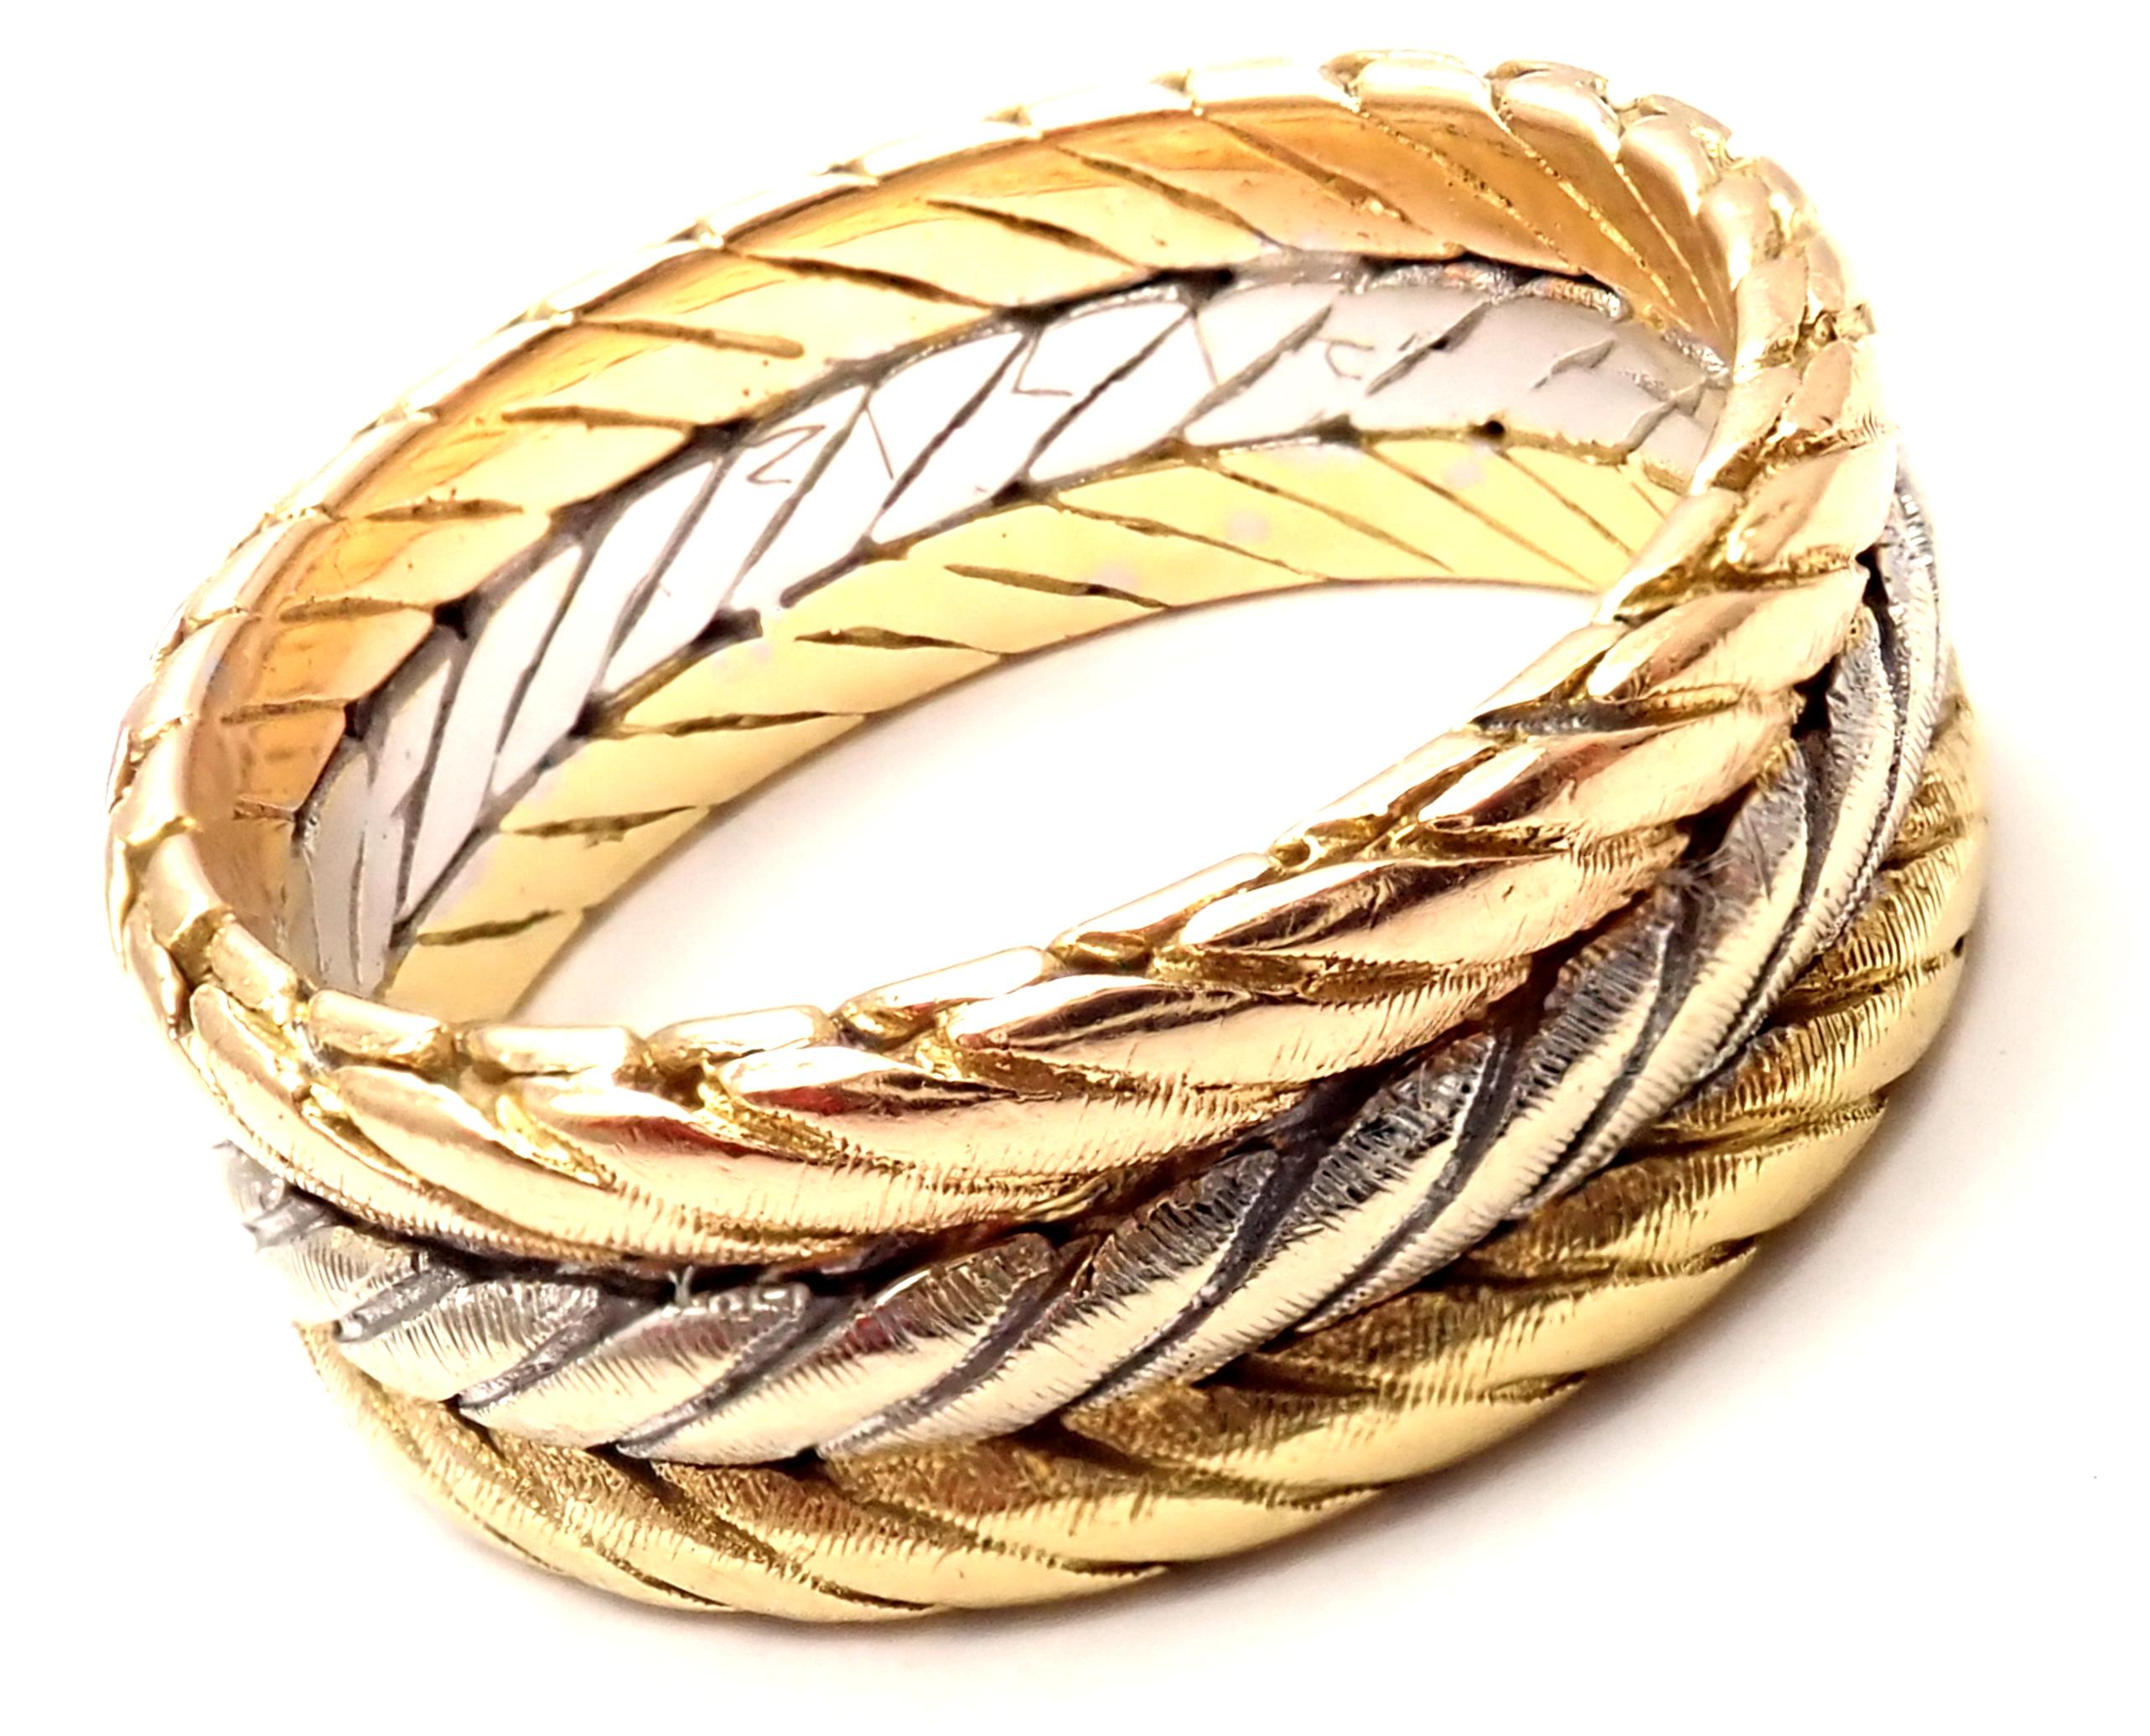 18k Tri-Color Gold Braided Band Ring by Buccellati.
Details: 
Size: 6
Weight: 7.3 grams
Measurements:	7mm band
Stamped Hallmarks: Buccellati Italy 18k
*Free Shipping within the United States*
YOUR PRICE: $1,350
T2486eod